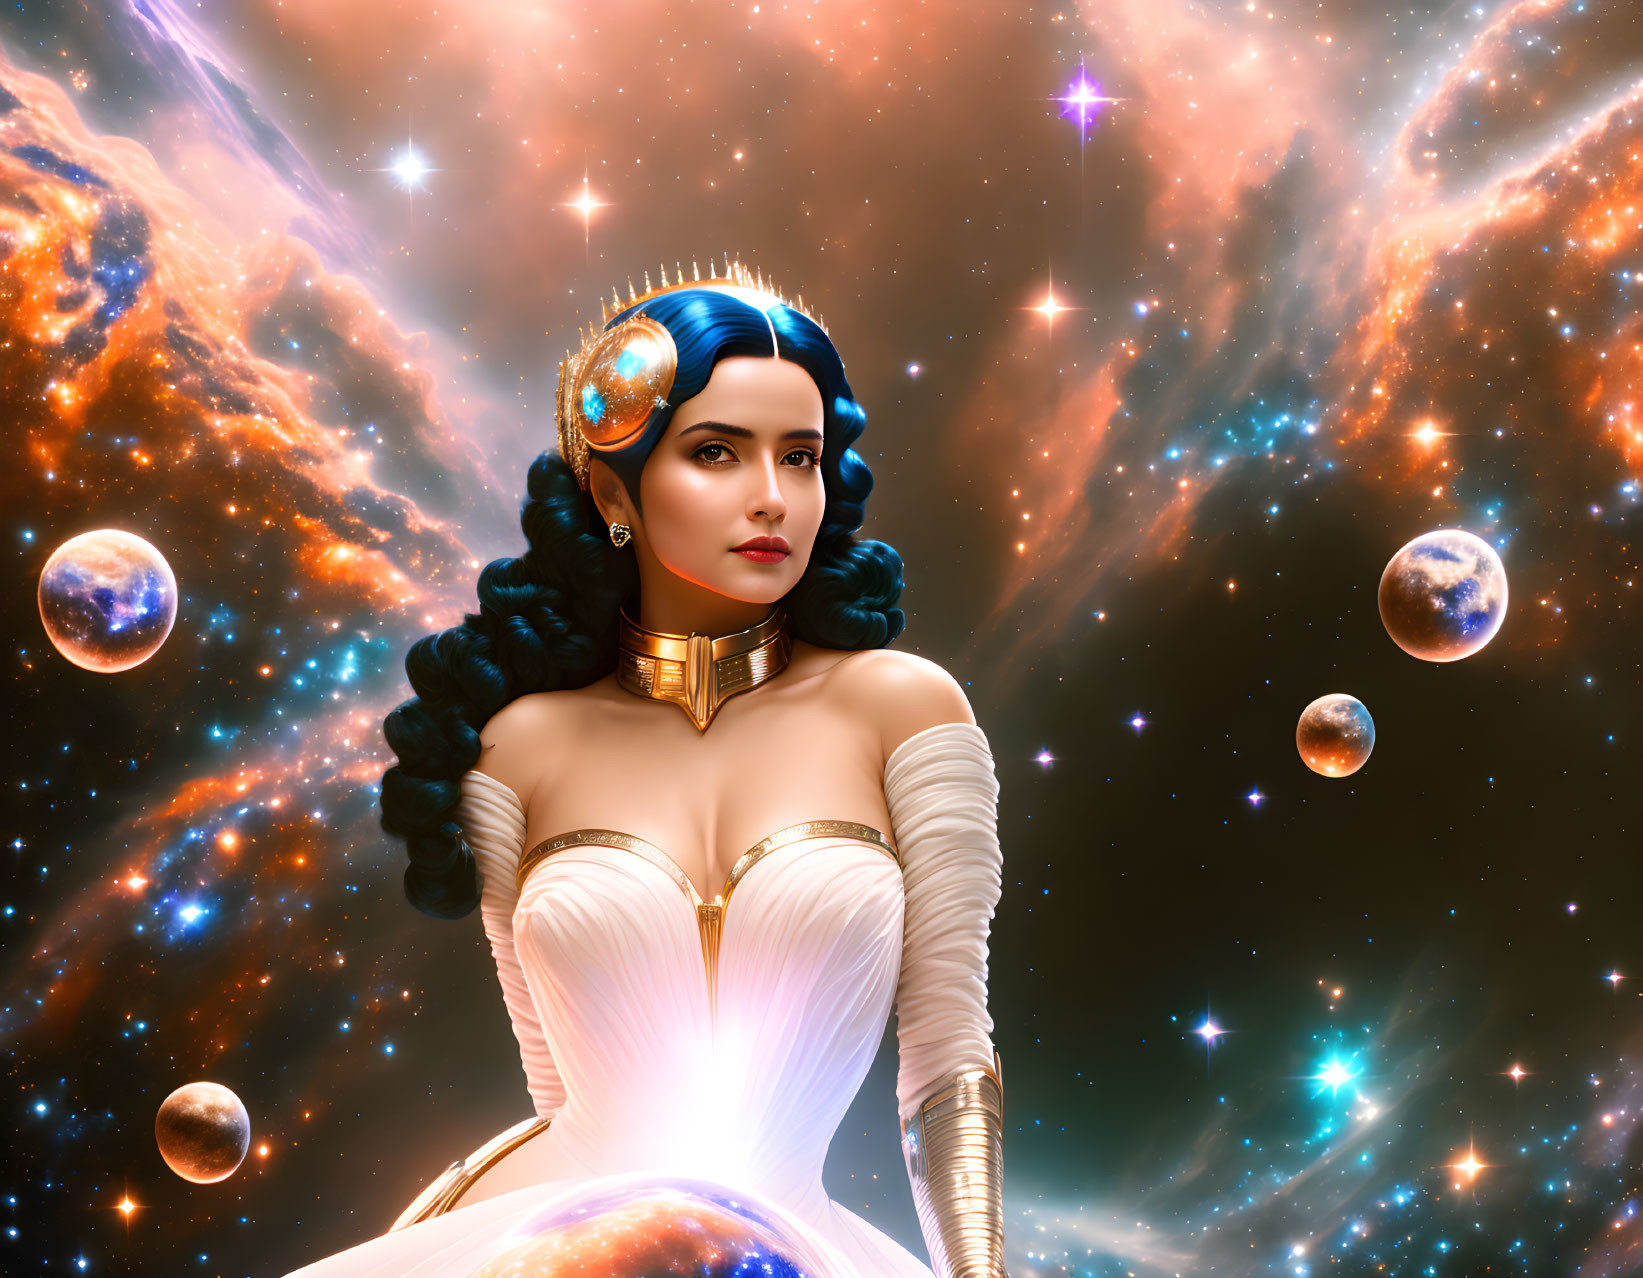 Regal woman in cosmic setting with white dress and space-themed headdress